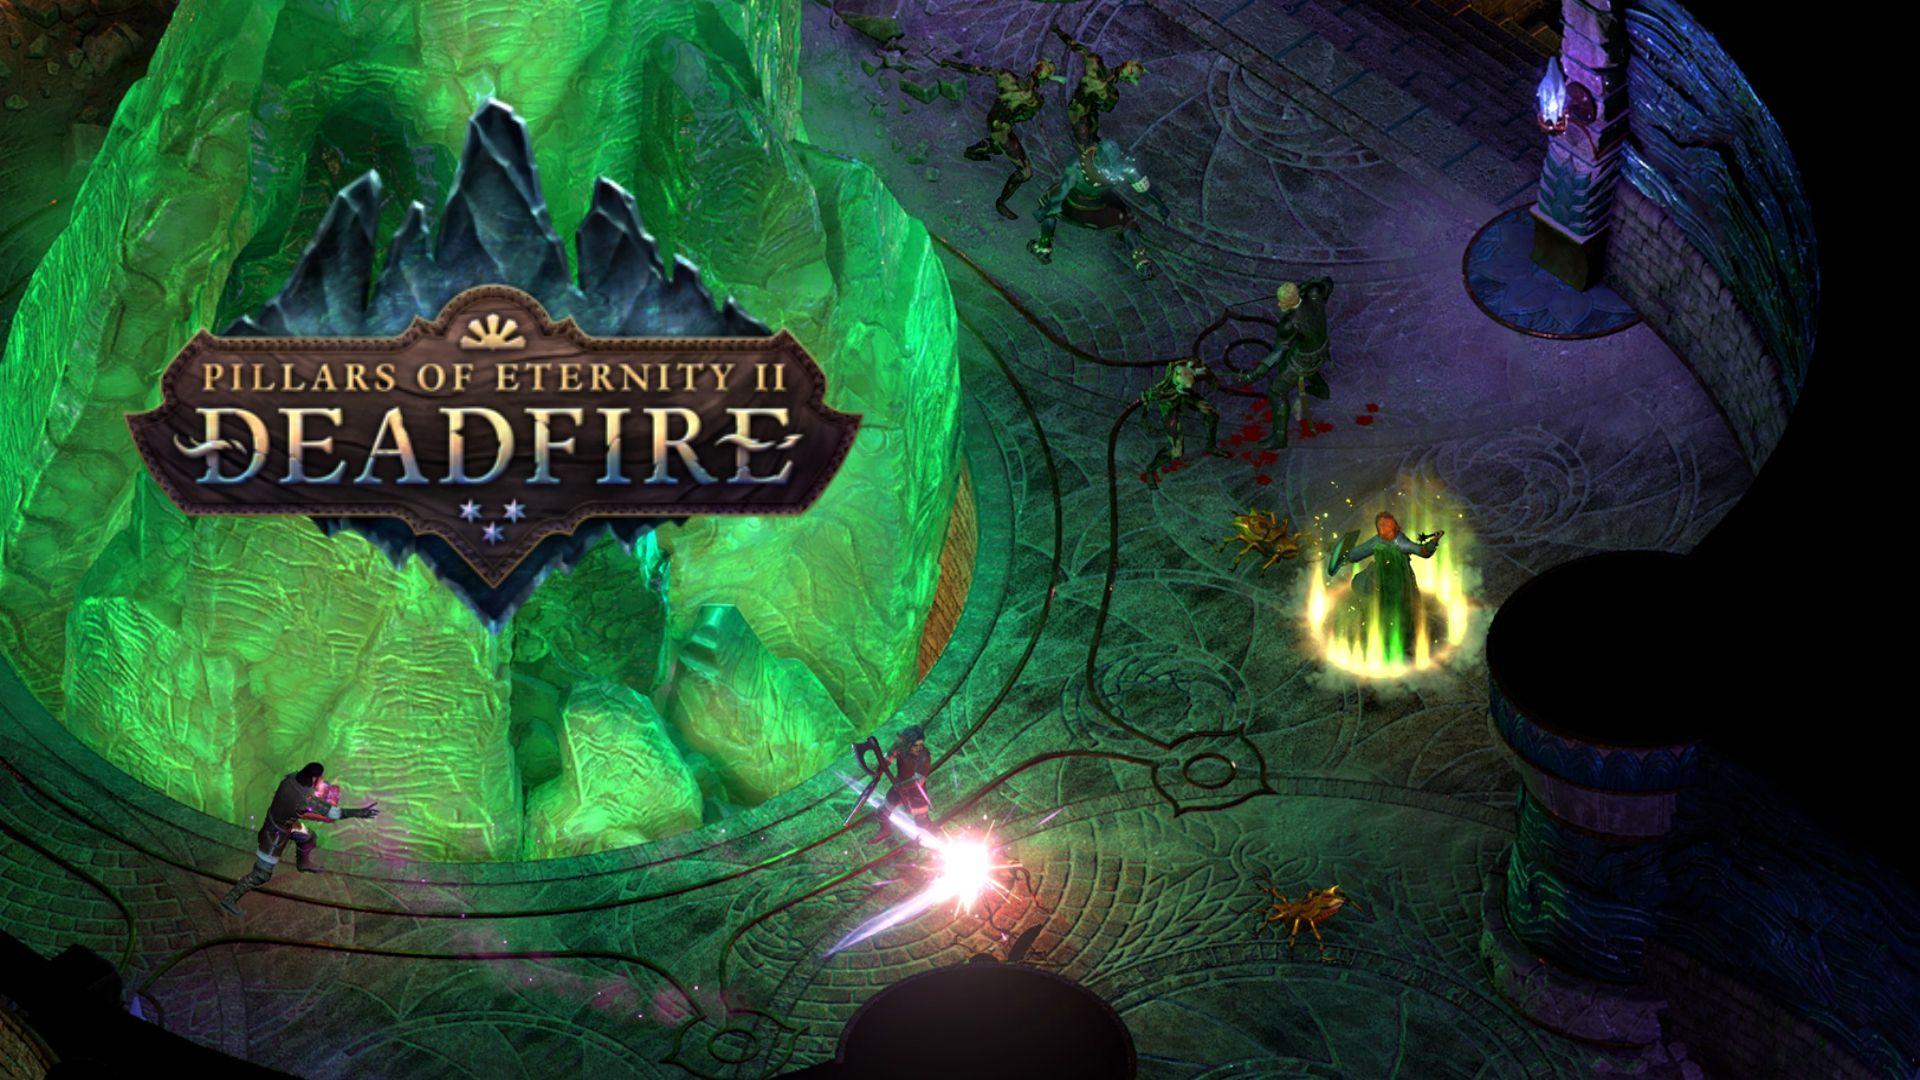 Pillars Of Eternity II Deadfire Heading To Consoles, Includes